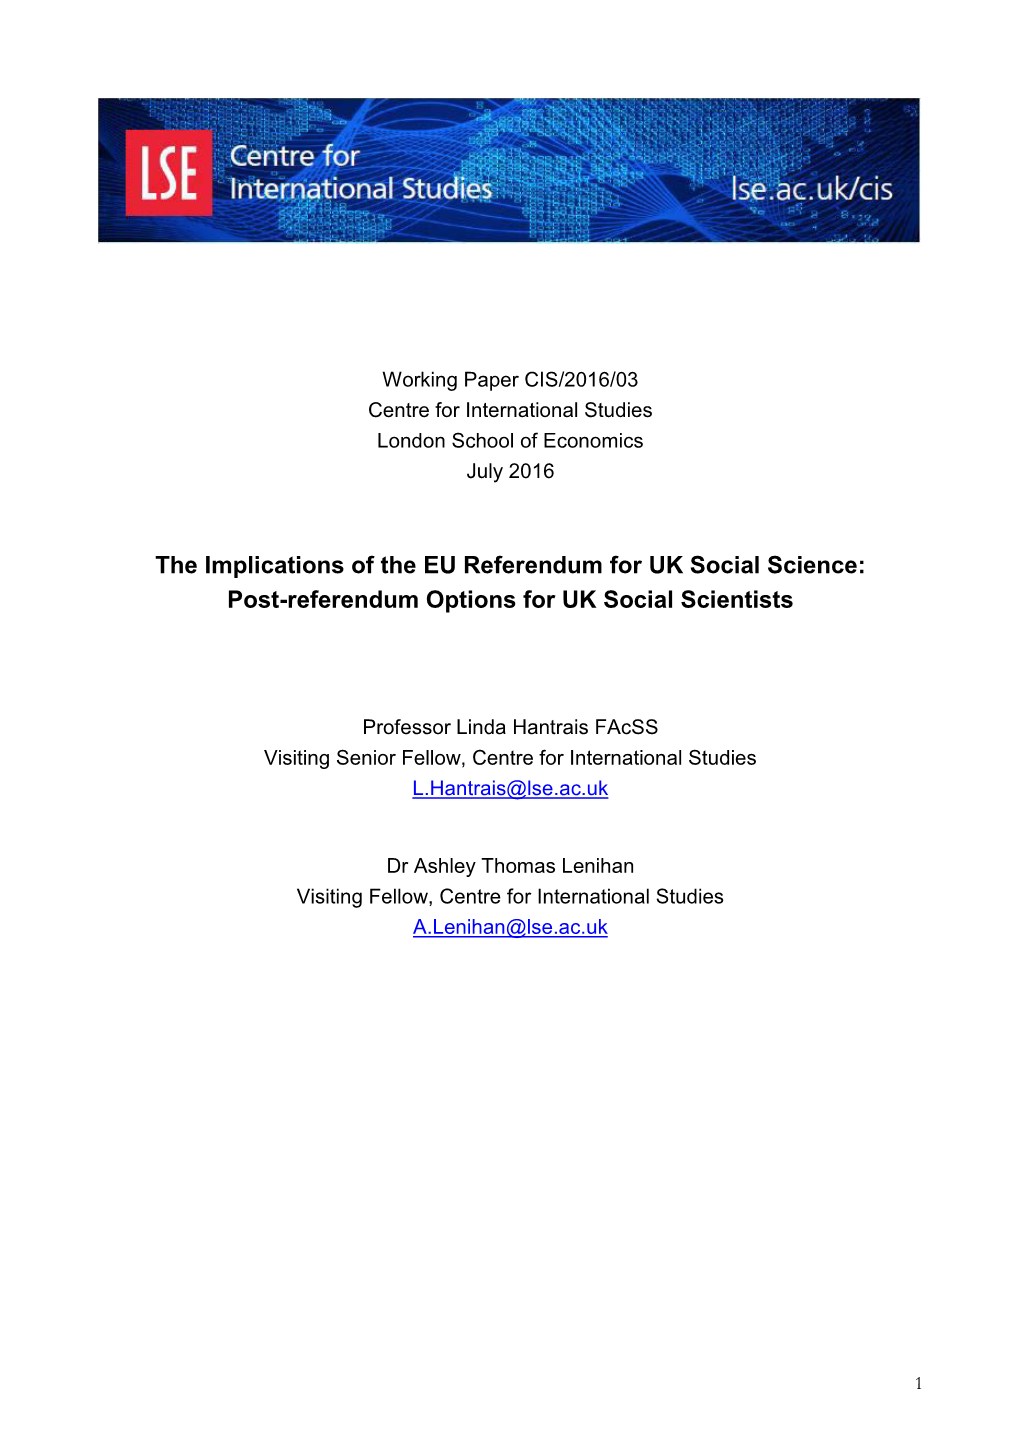 The Implications of the EU Referendum for UK Social Science: Post-Referendum Options for UK Social Scientists